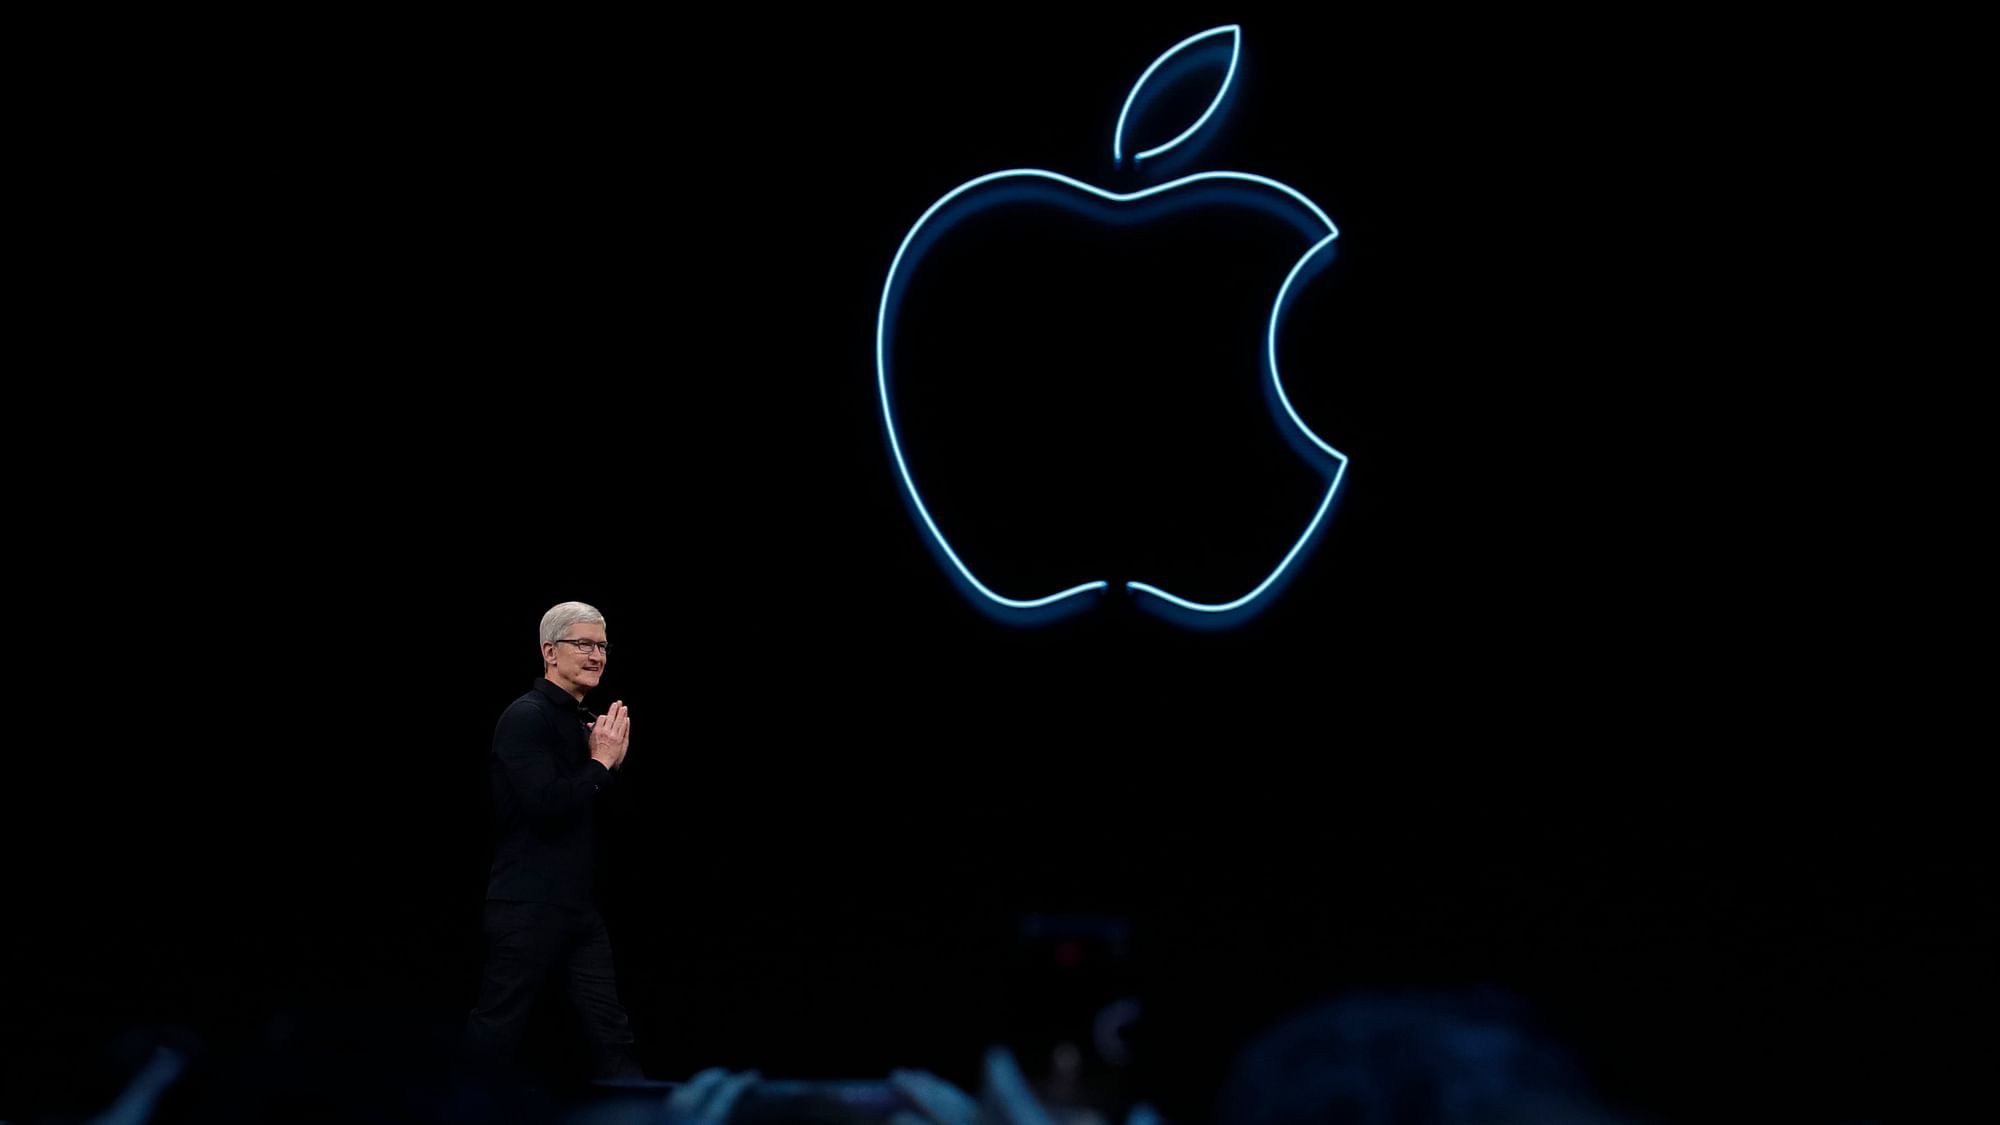 Tim Cook, CEO, Apple on the stage at WWDC 2019.